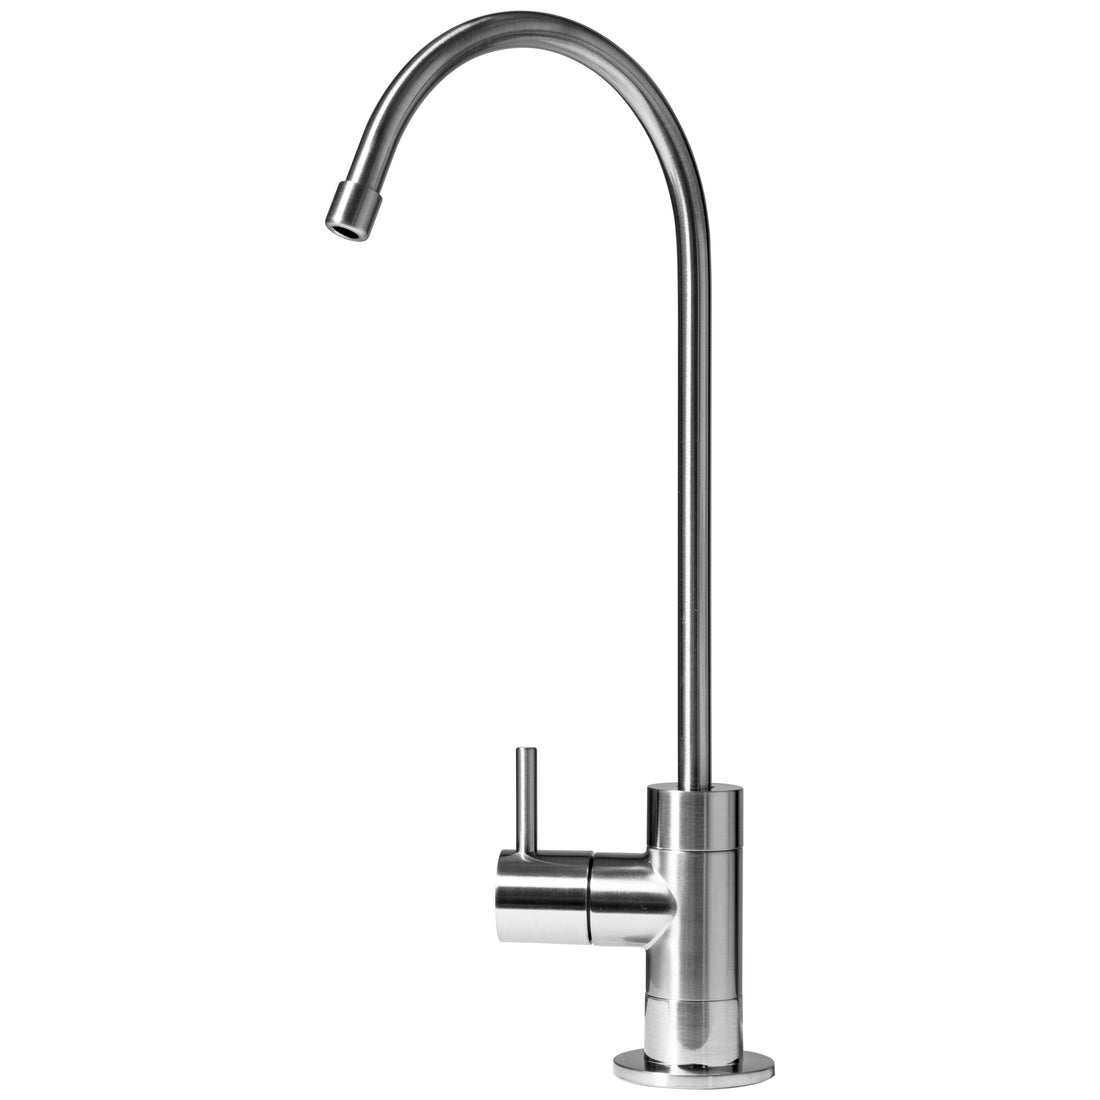 Aquasure Designer Series Contemporary Styled Drinking Water Designer Faucet with Ceramic Disc Valve (Brushed Nickel)